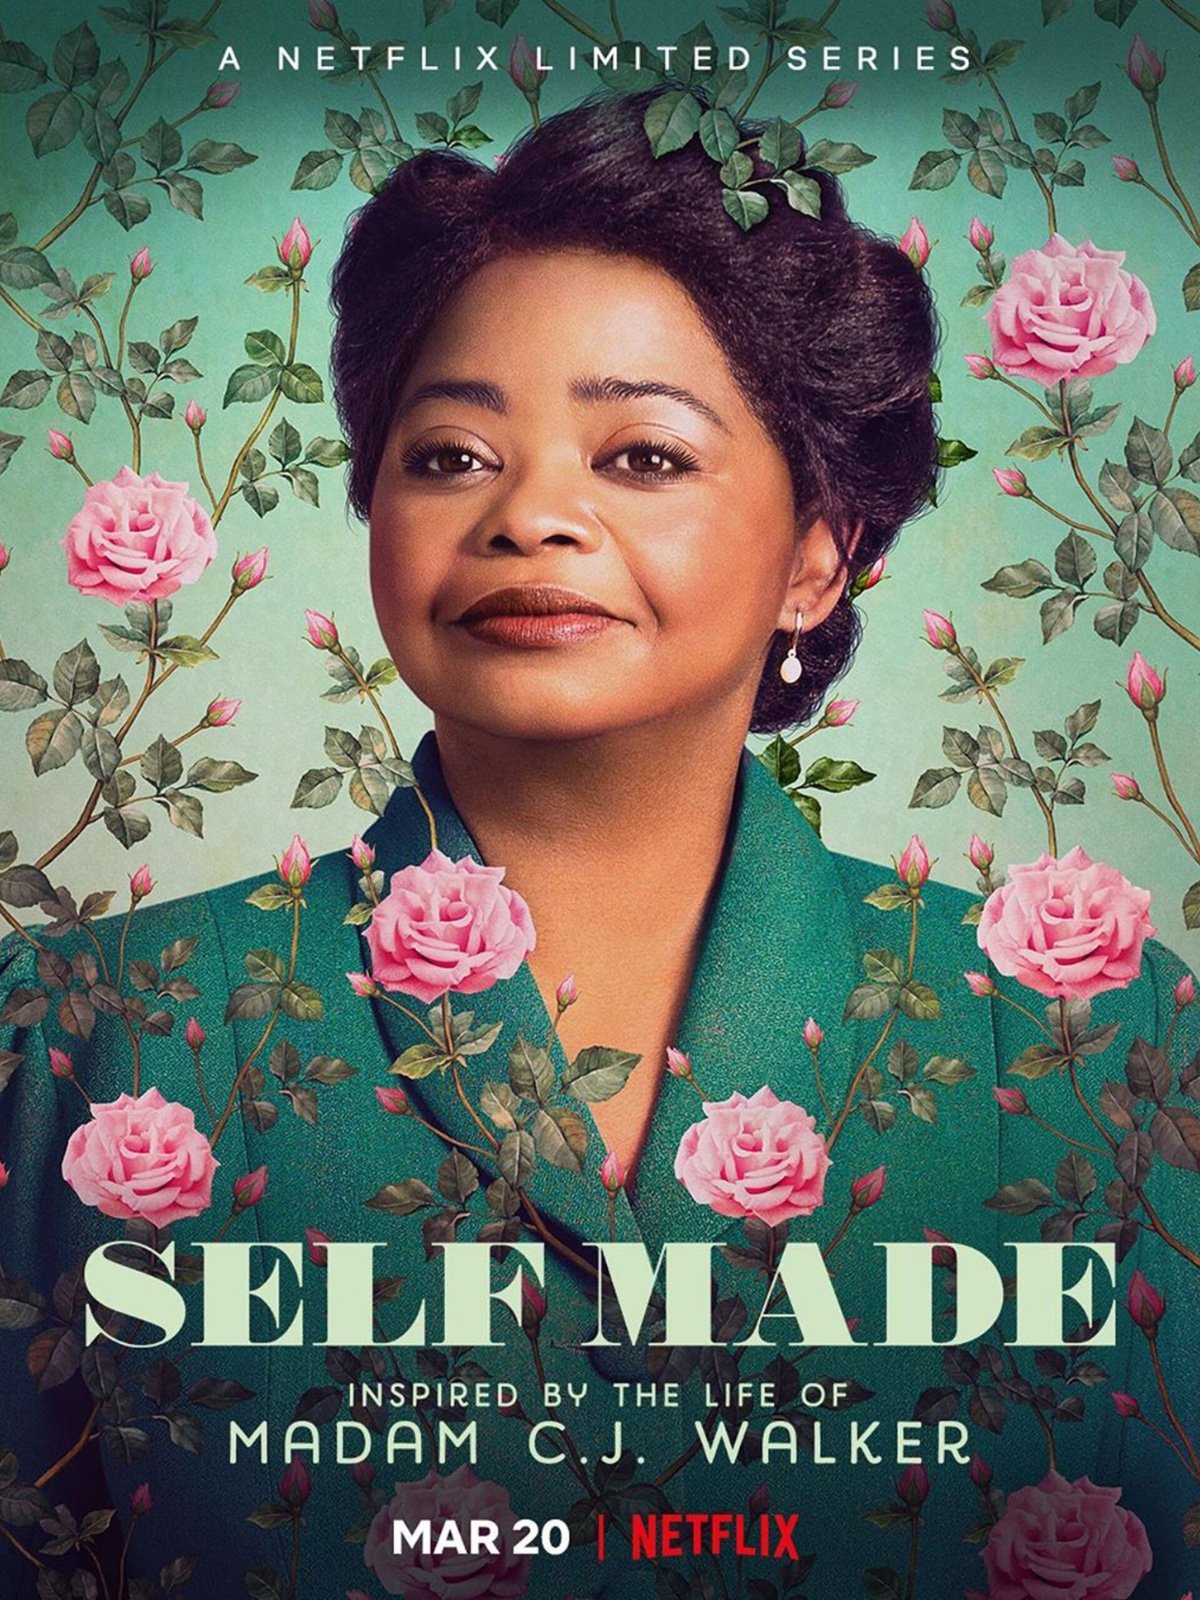 35 - Self Made: Inspired by the Life of Madam C.J. Walker